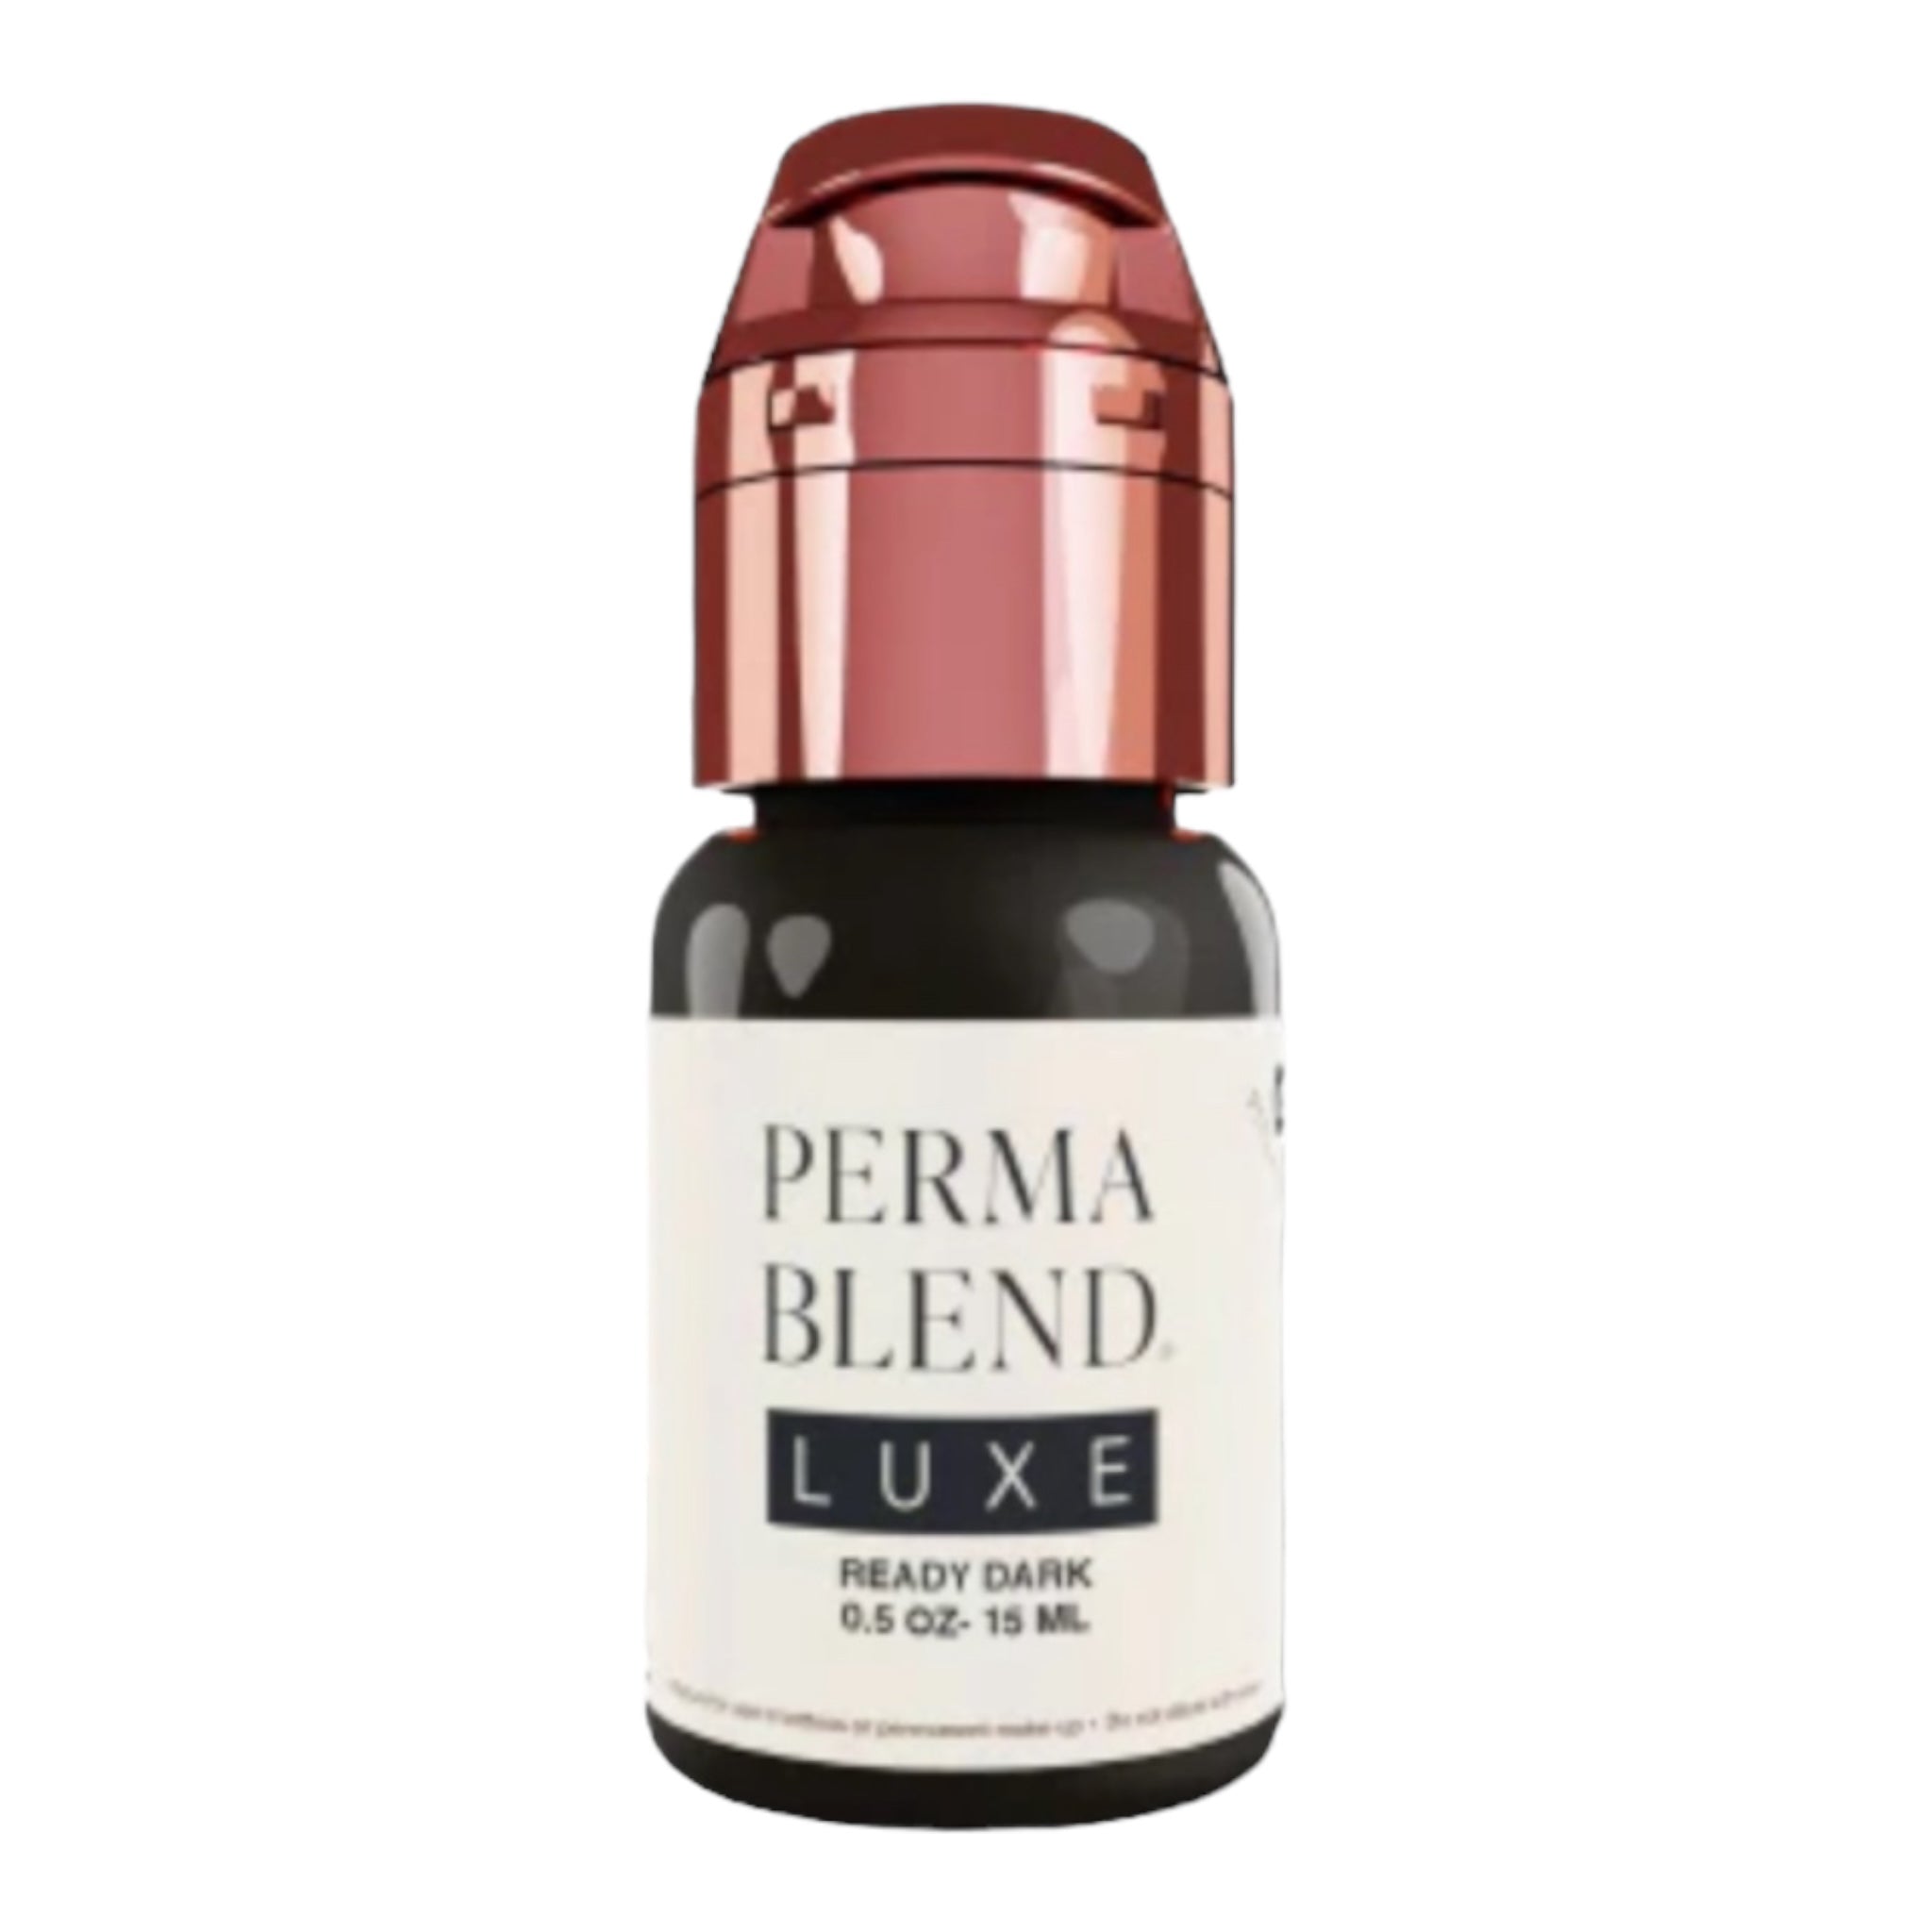 Encre Maquillage Perma Blend Luxe 15ml - Ready Dark